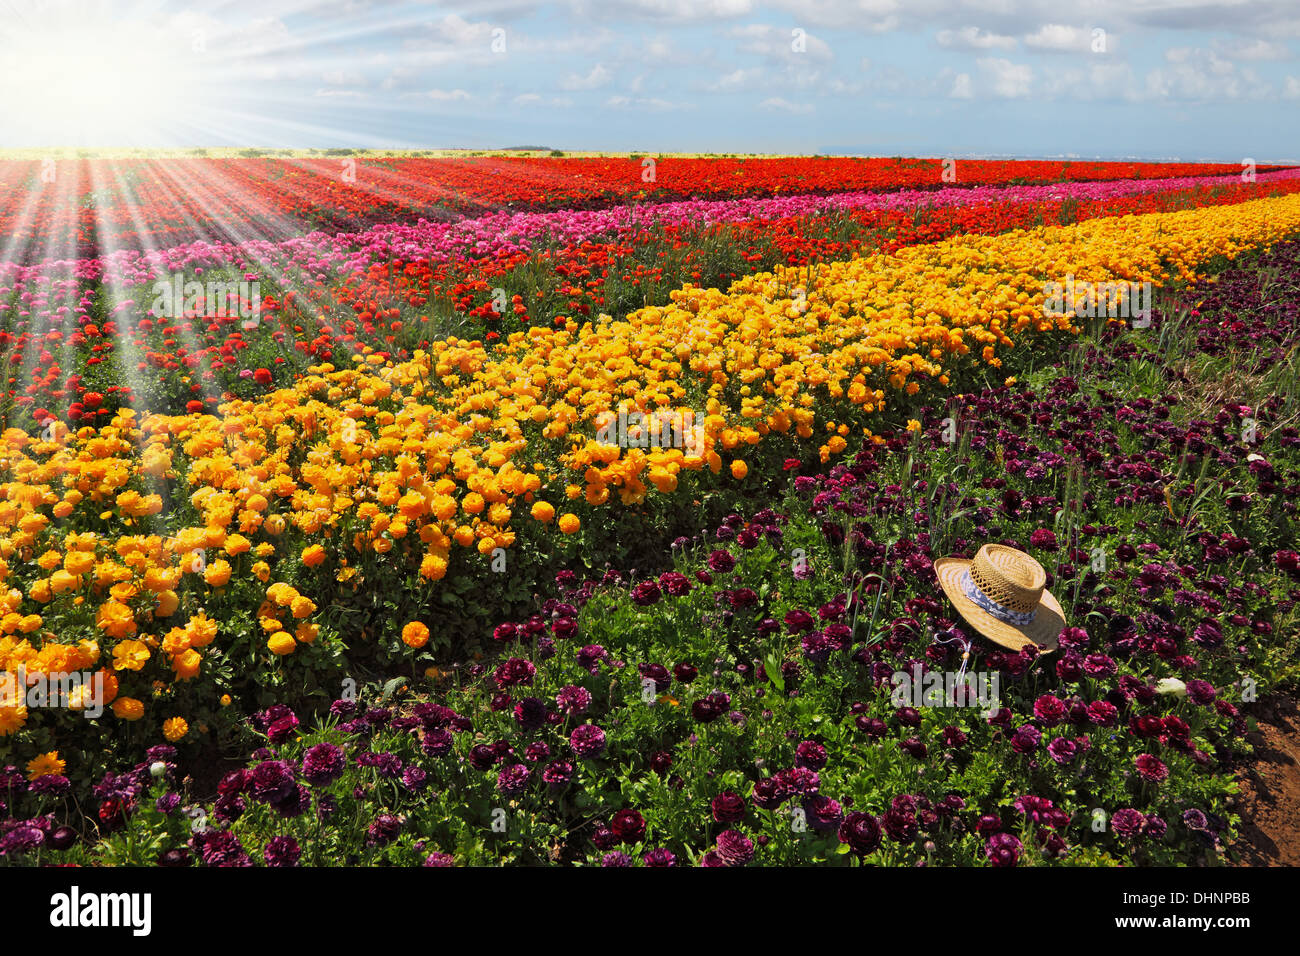 The multi-color flower field Stock Photo